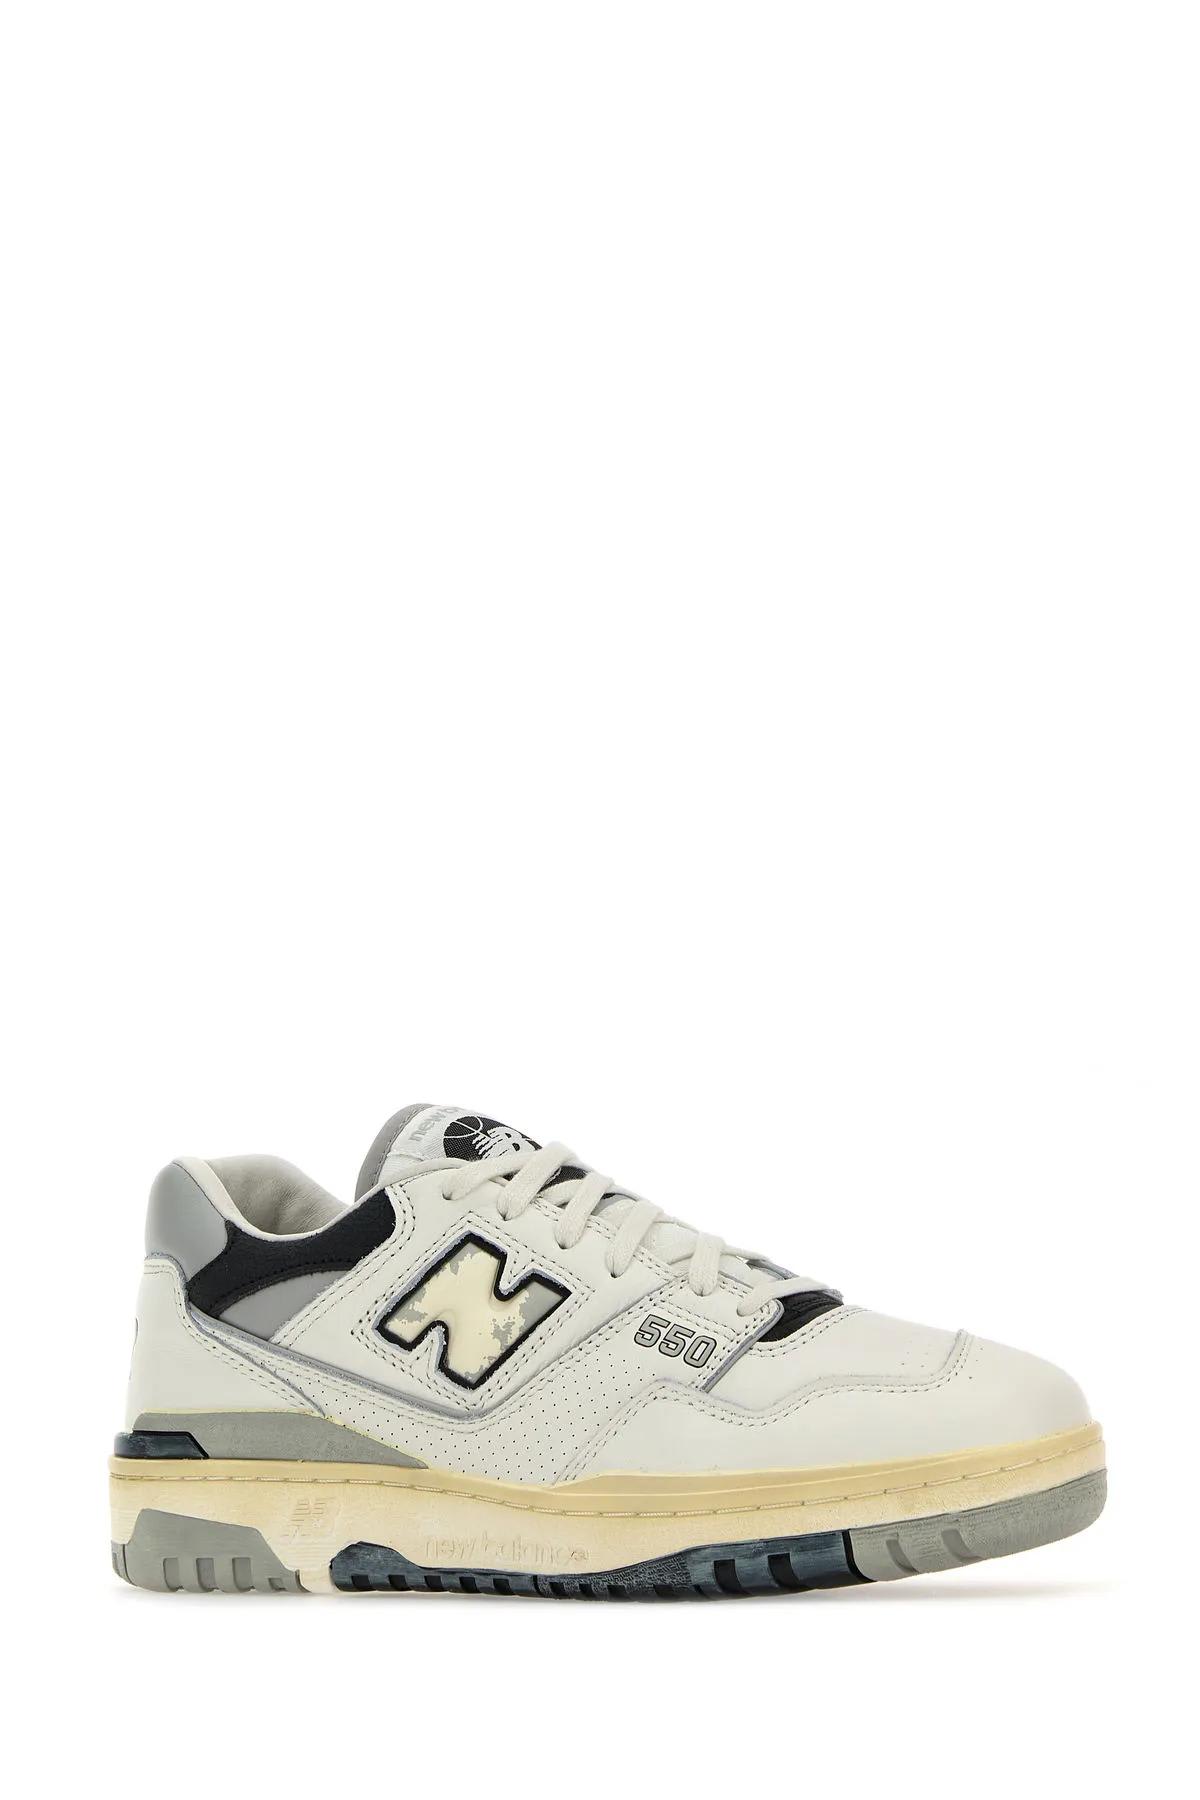 Shop New Balance Multicolor Leather 550 Sneakers In Grey